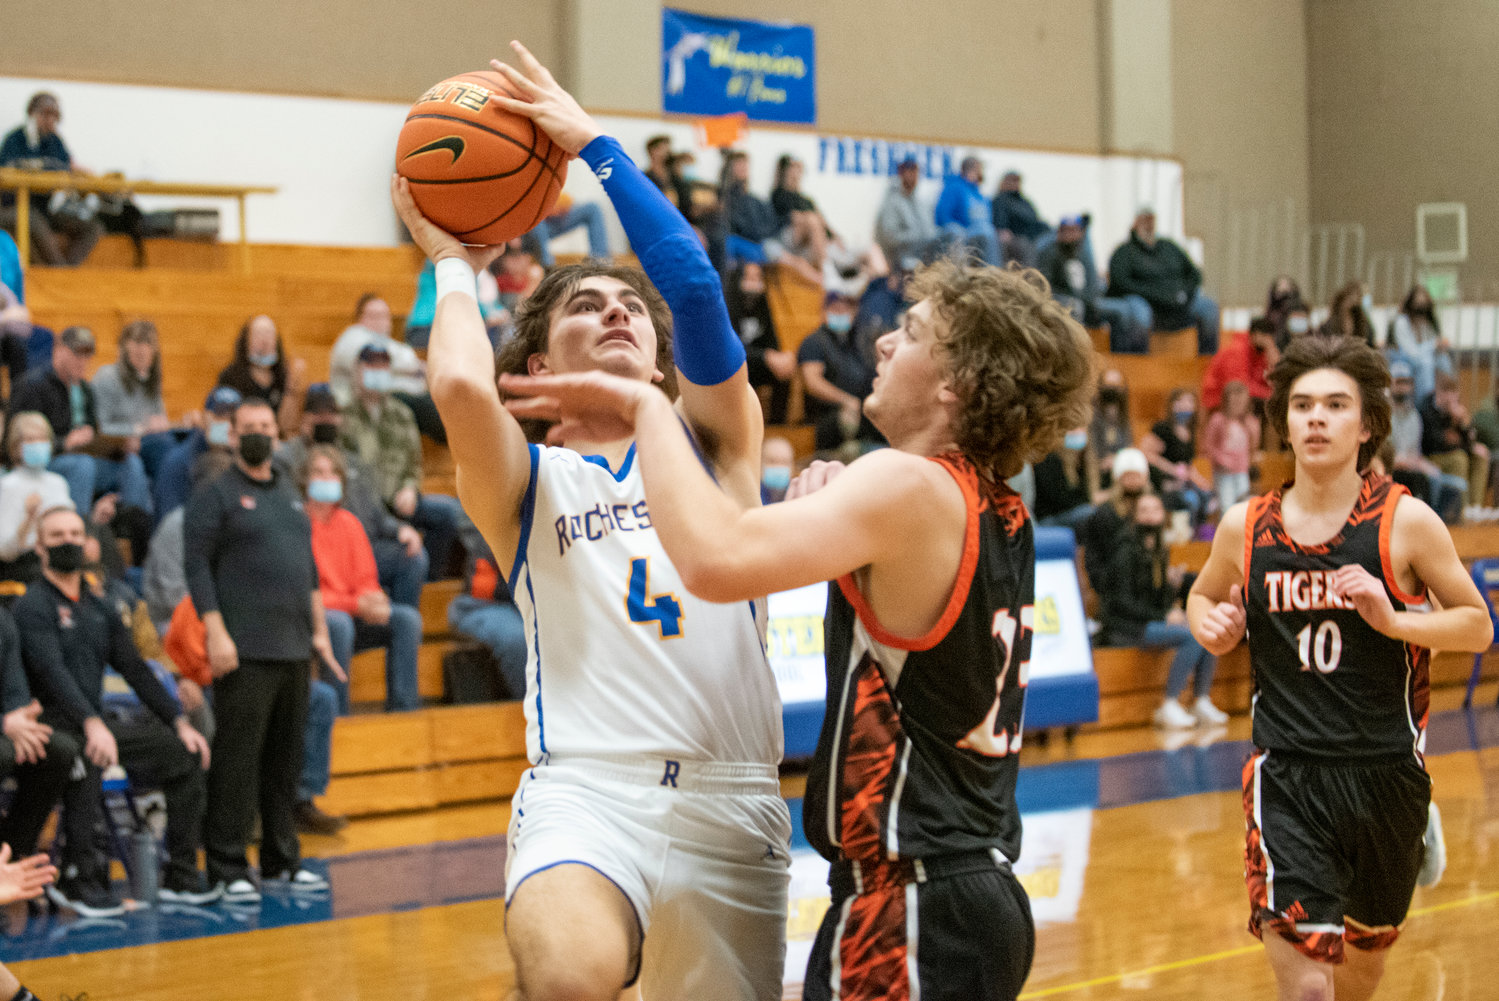 Rochester's Saywer Robbins (4) drives for a shot in the paint against Centralia's Cole Wasson (23) at home on Jan. 19.